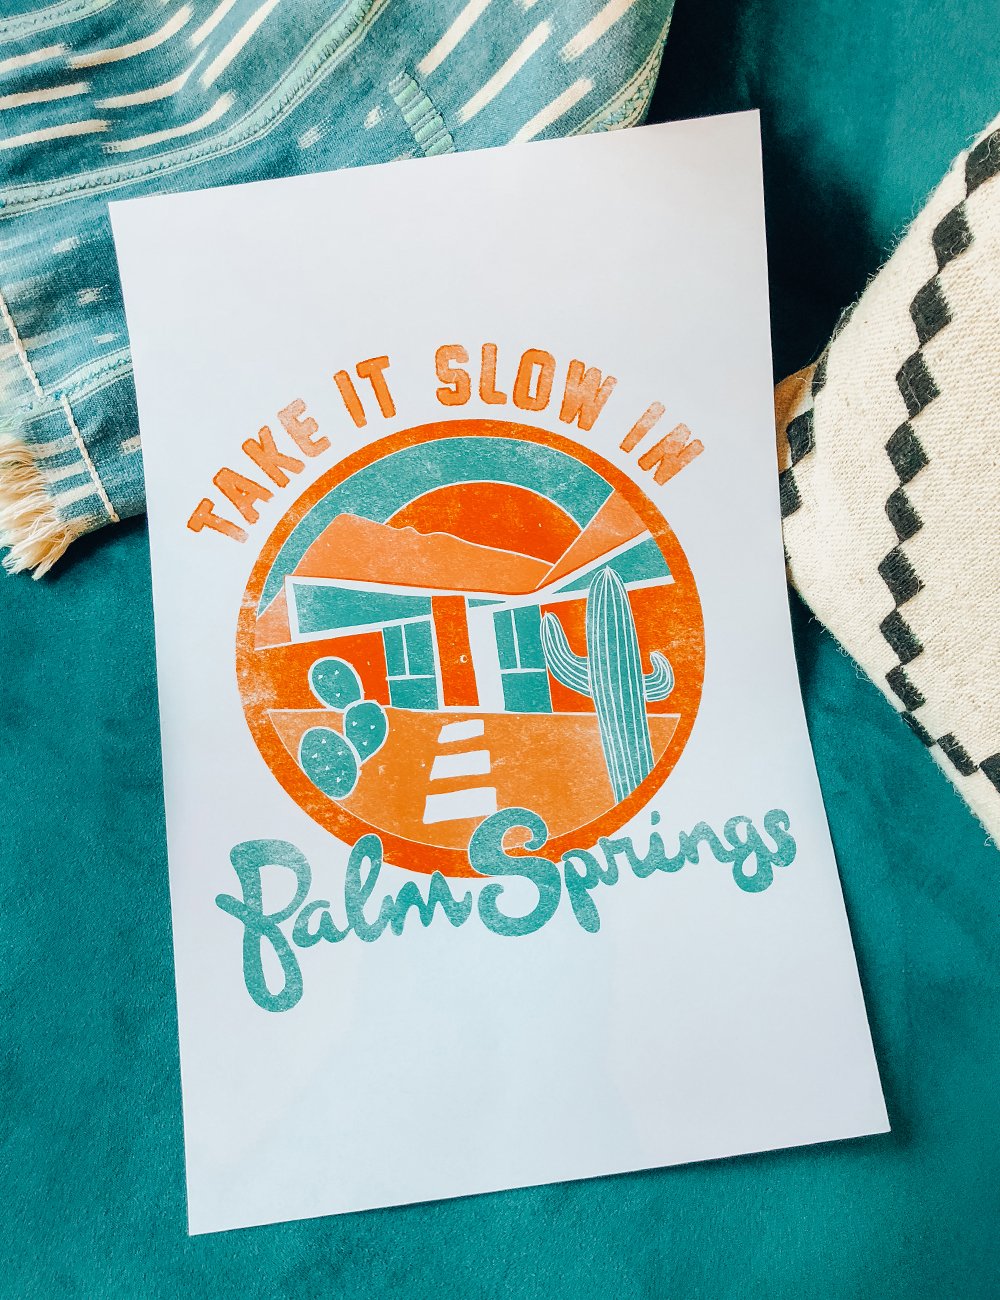 Palm Springs Poster